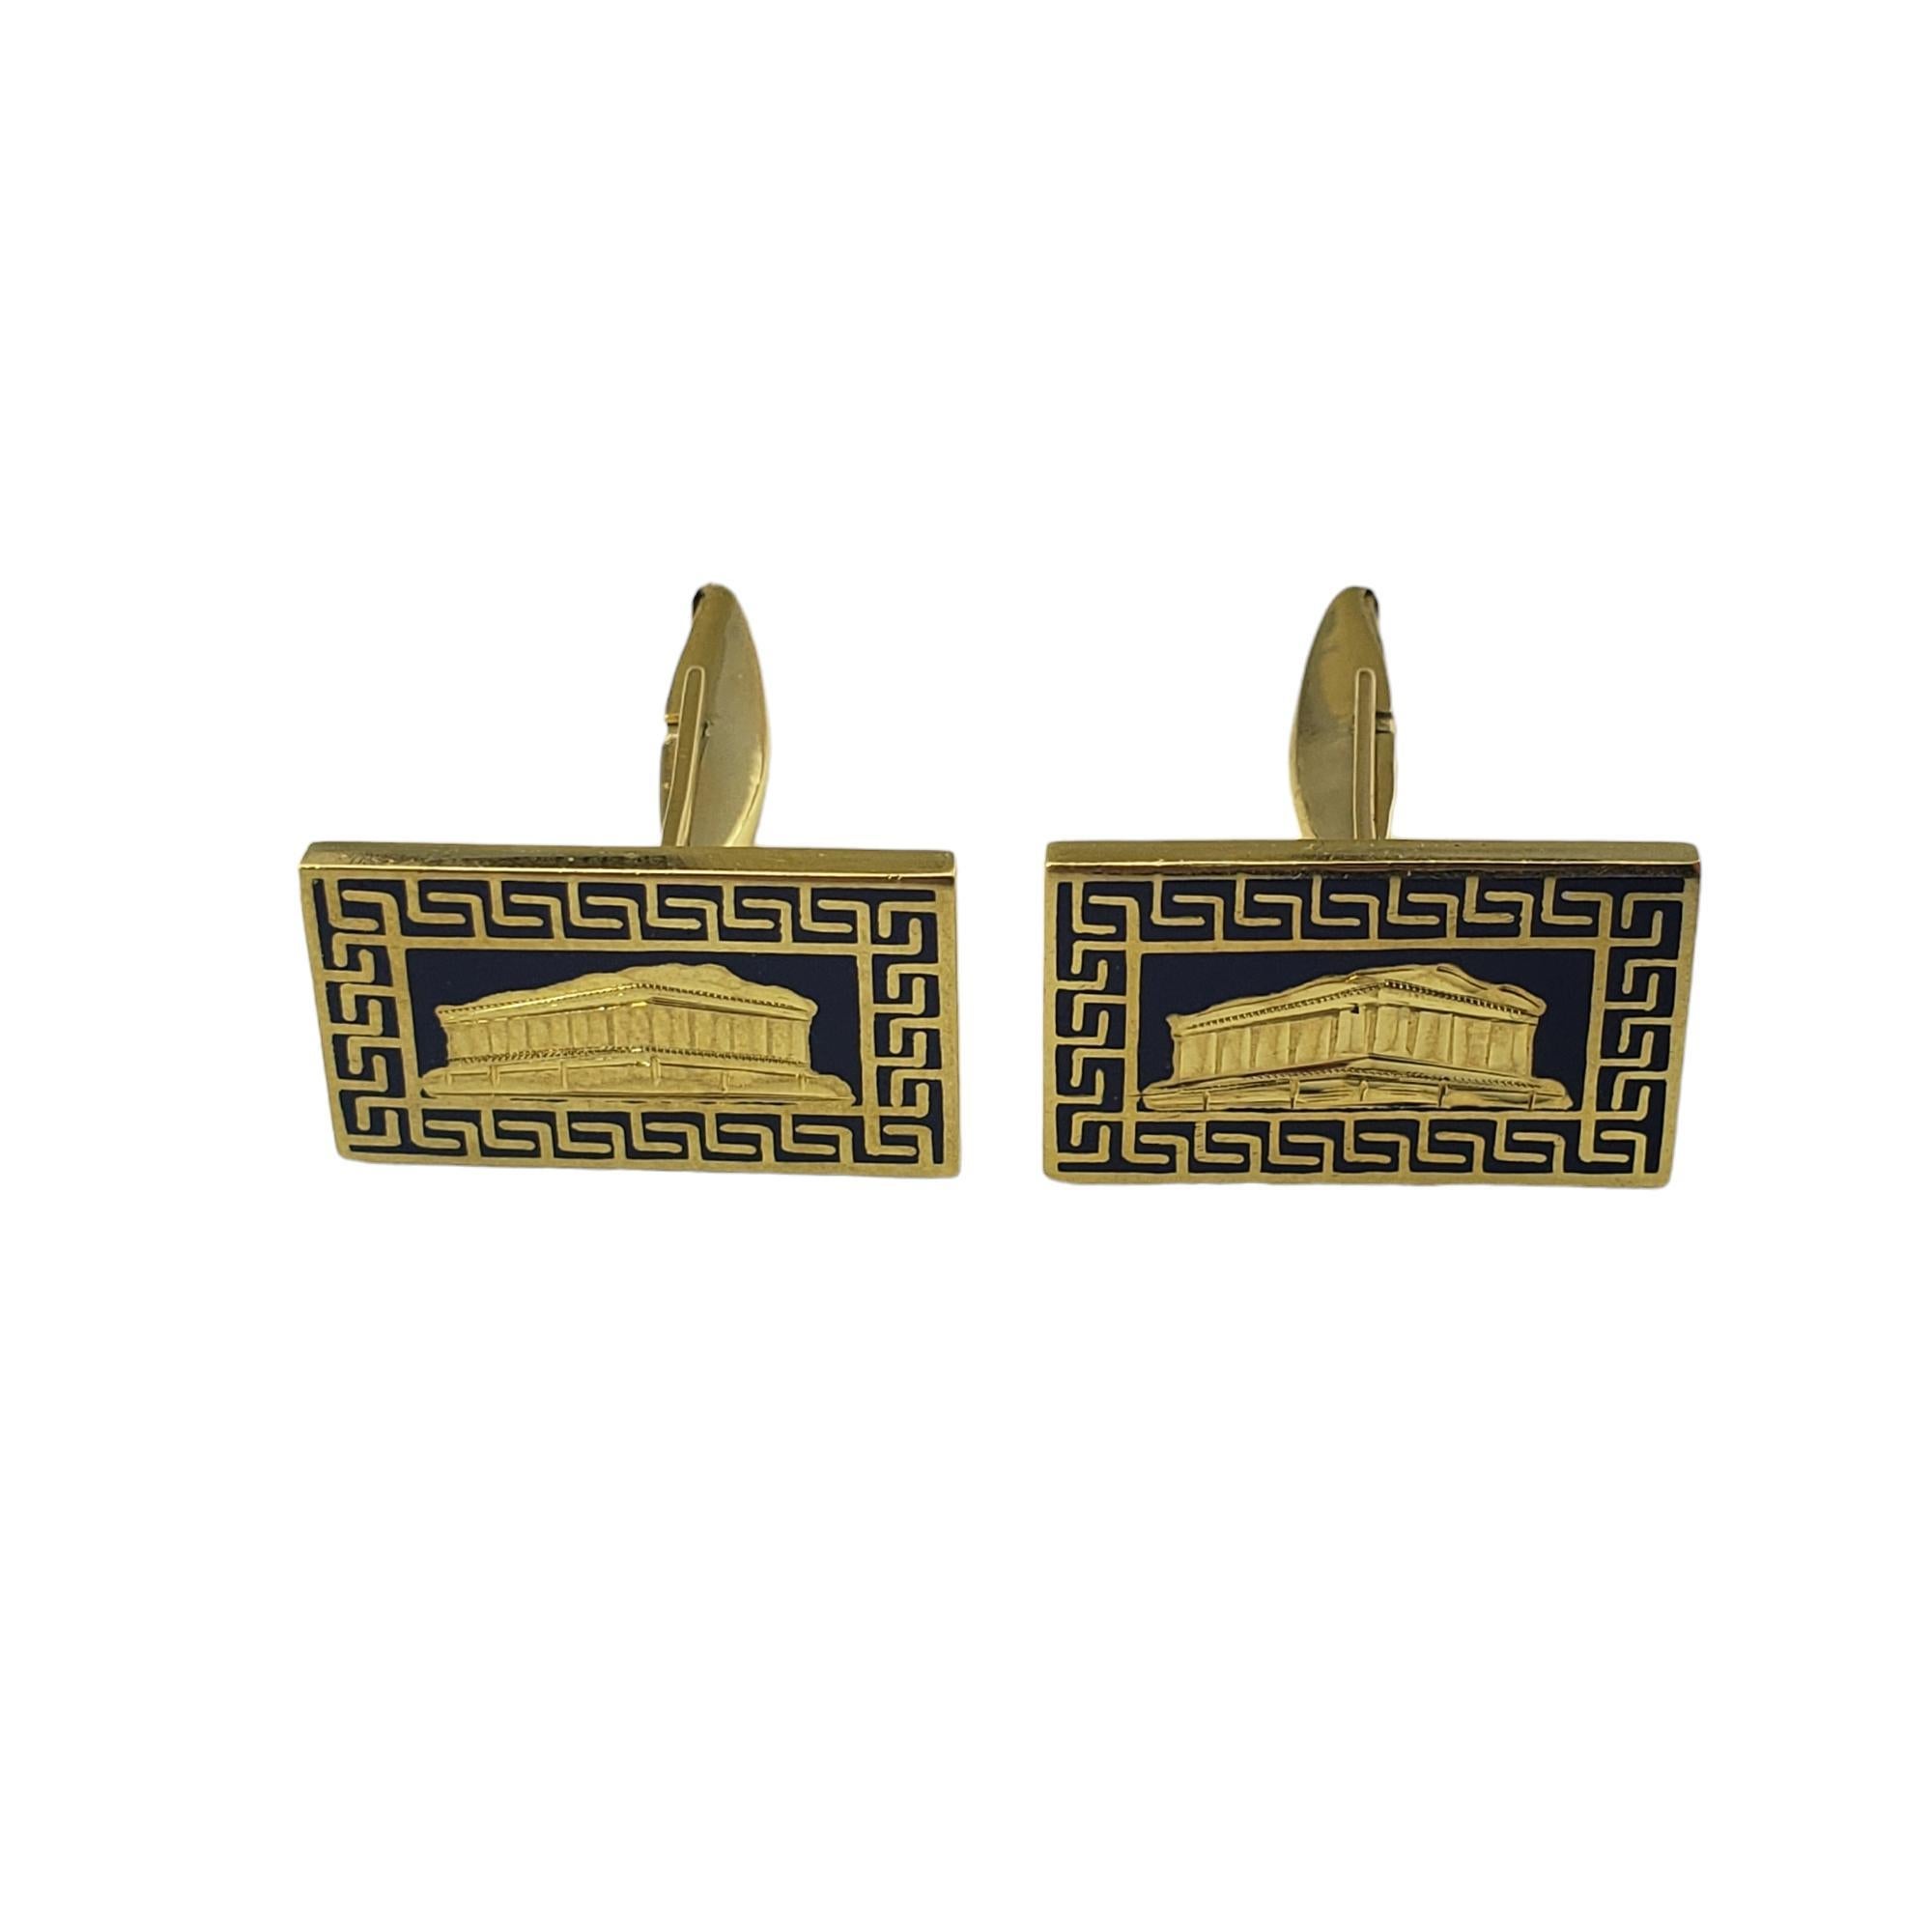  18 Karat Yellow Gold and Enamel Parthenon Cufflinks #15529 In Good Condition For Sale In Washington Depot, CT